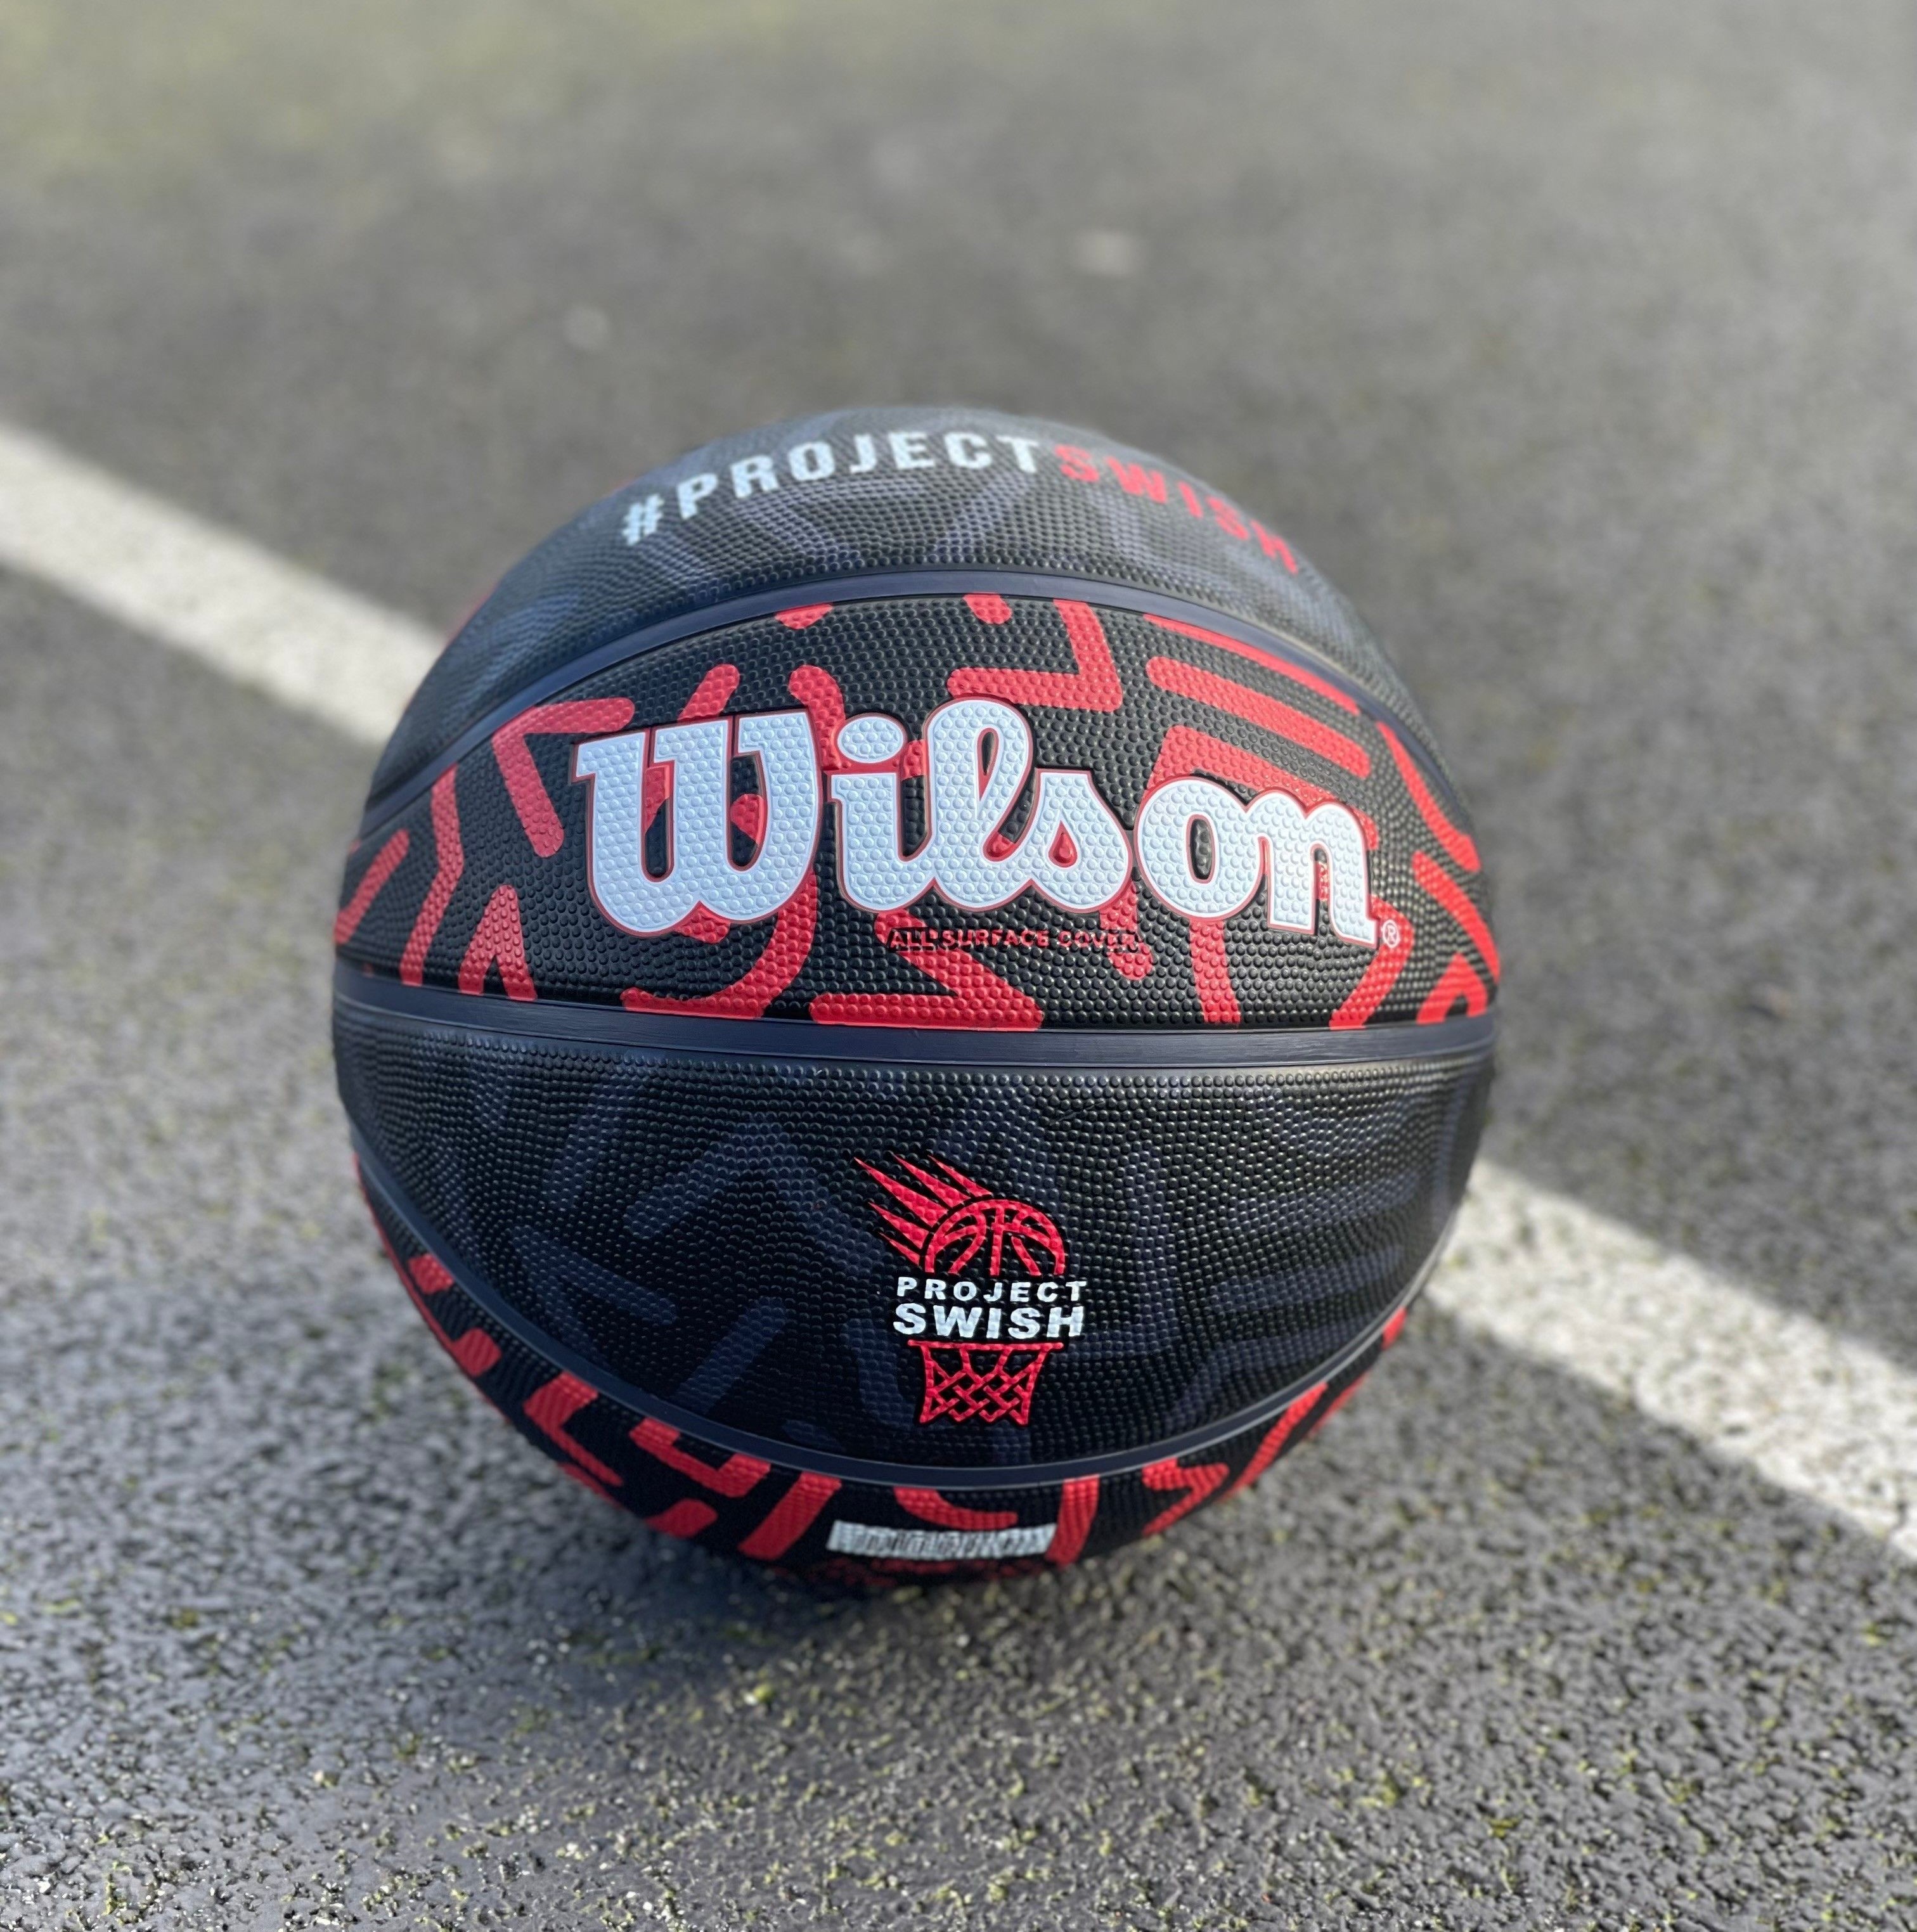 Project Swish Limited edition ball